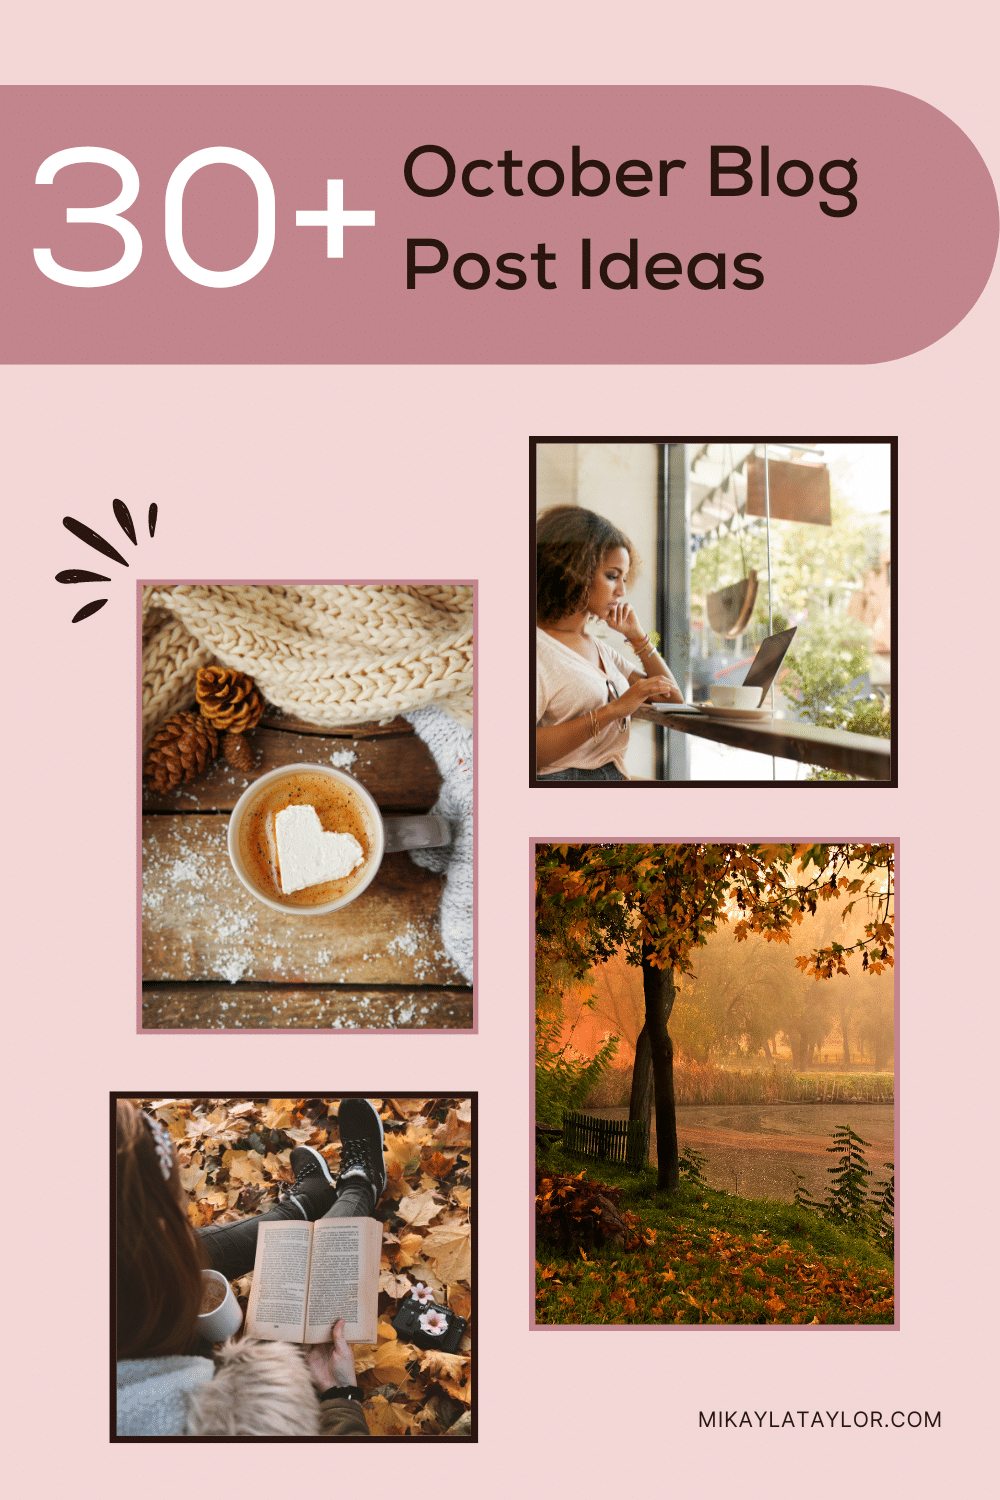 30+ october blog post ideas for your audience mikaylataylor.com